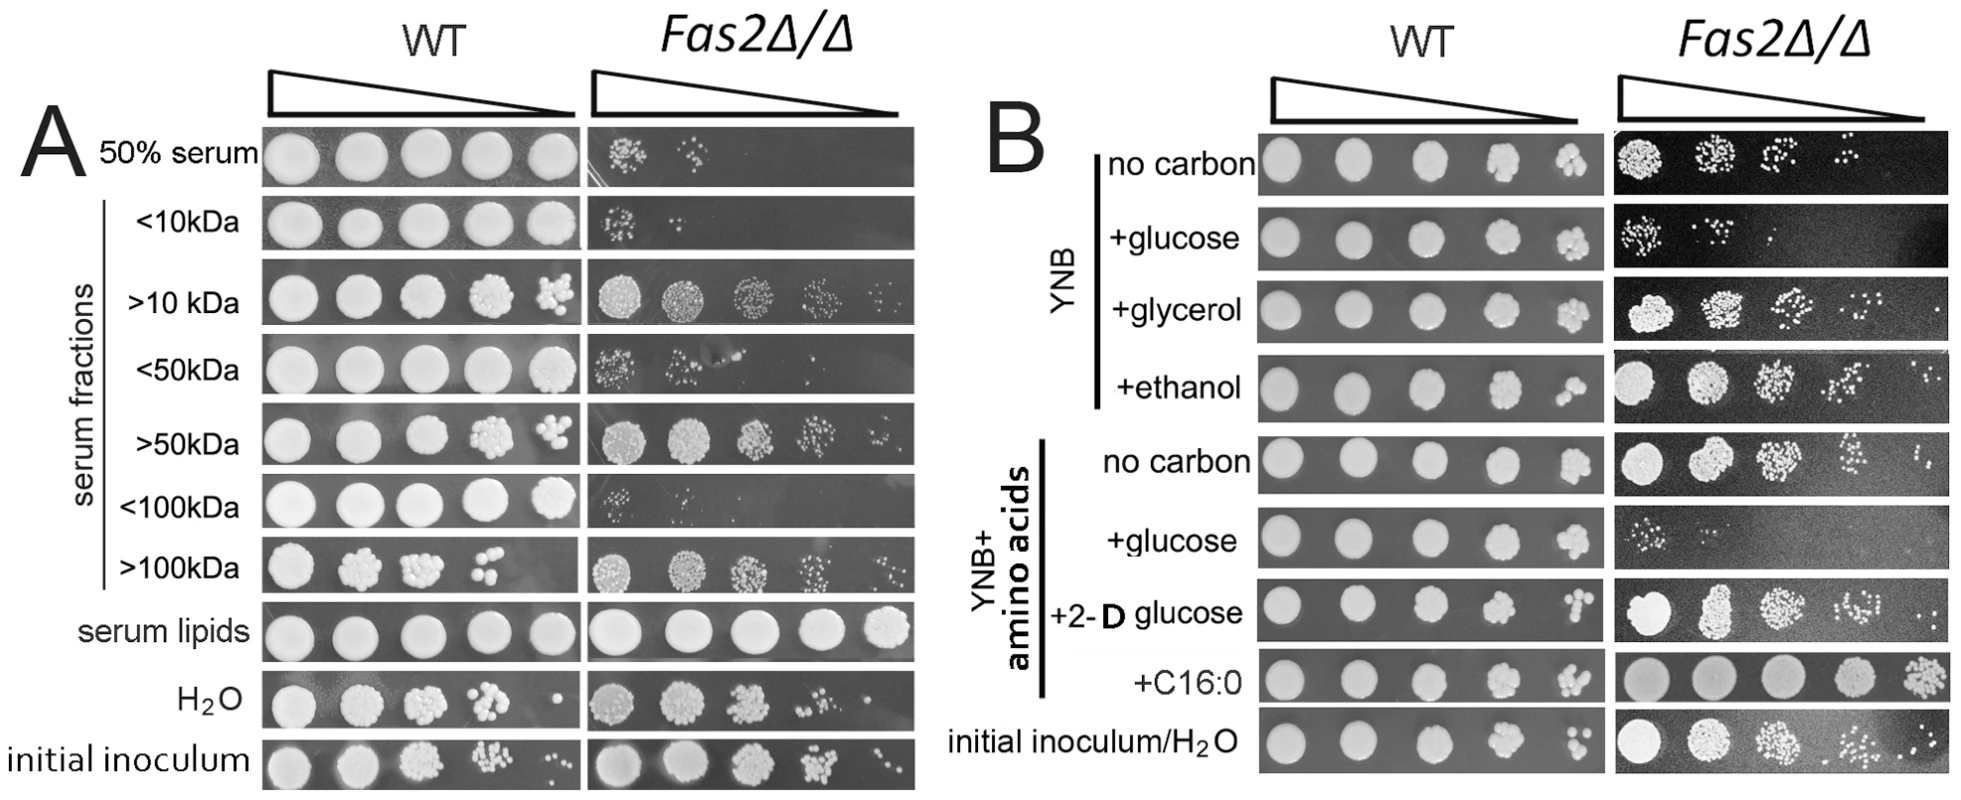 <i>Fas2Δ/Δ</i> strain is susceptible to serum and glucose containing media.